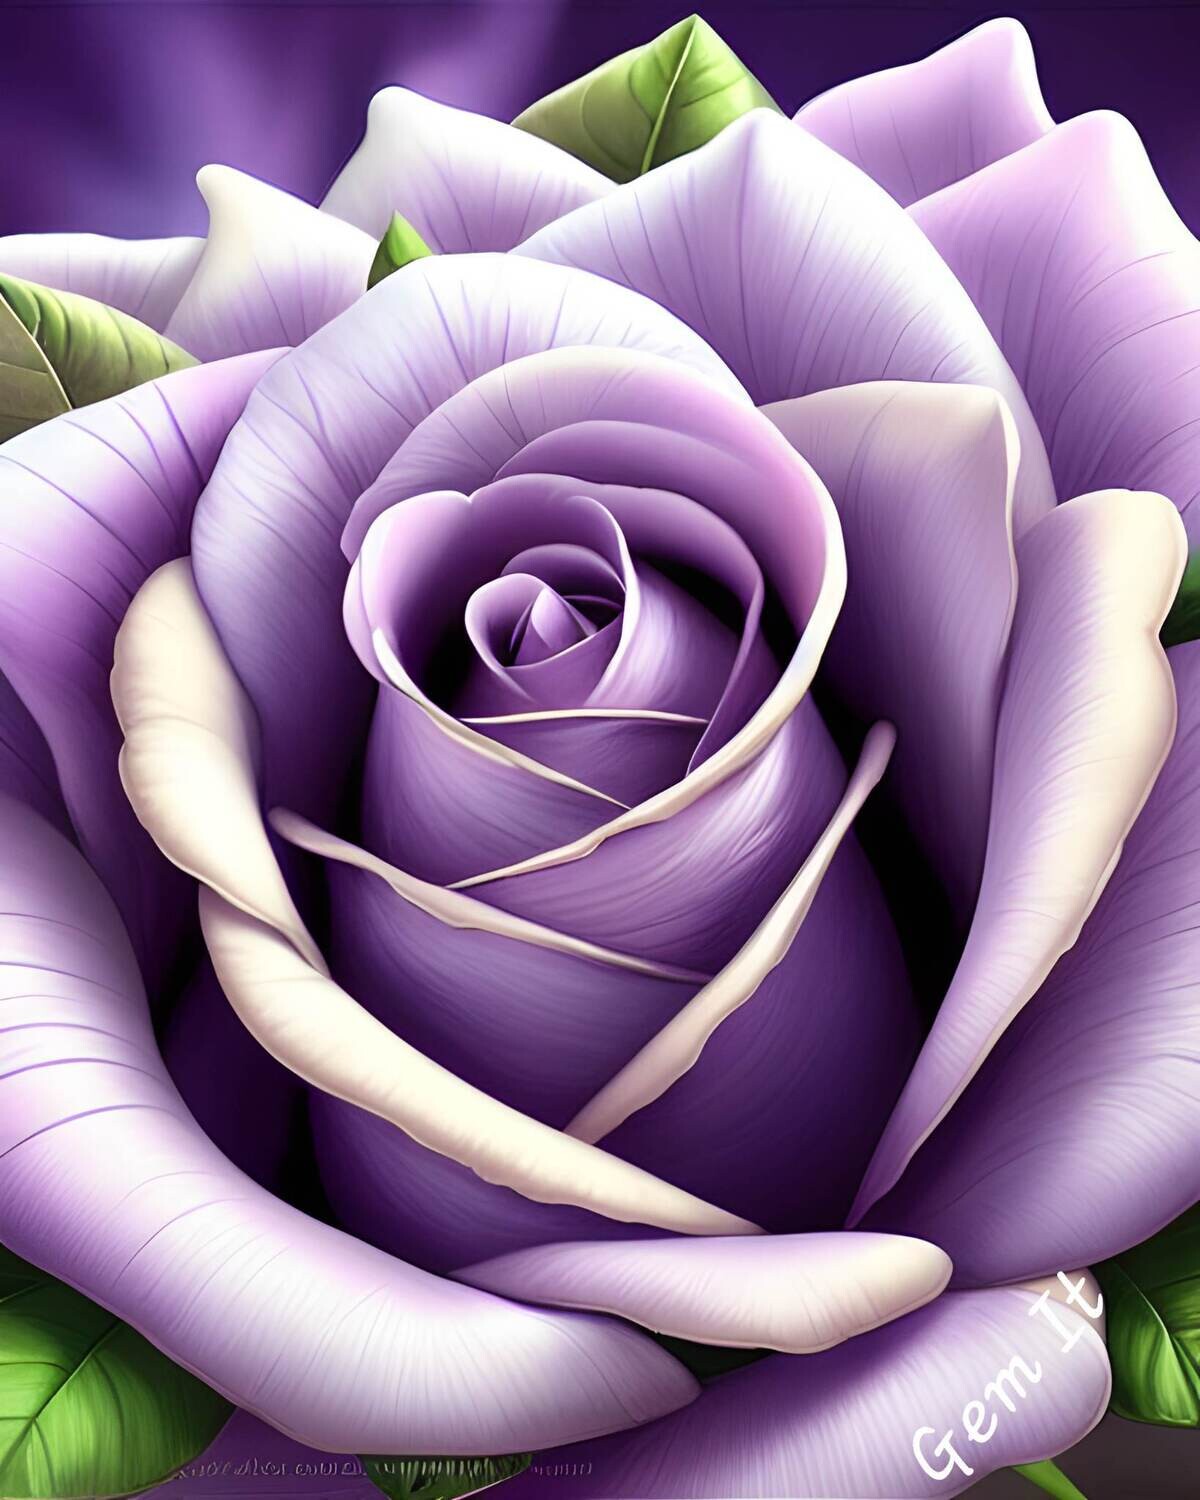 Single Rose Lilac 2 - Specially ordered for you. Delivery is approximately 4 - 6 weeks.